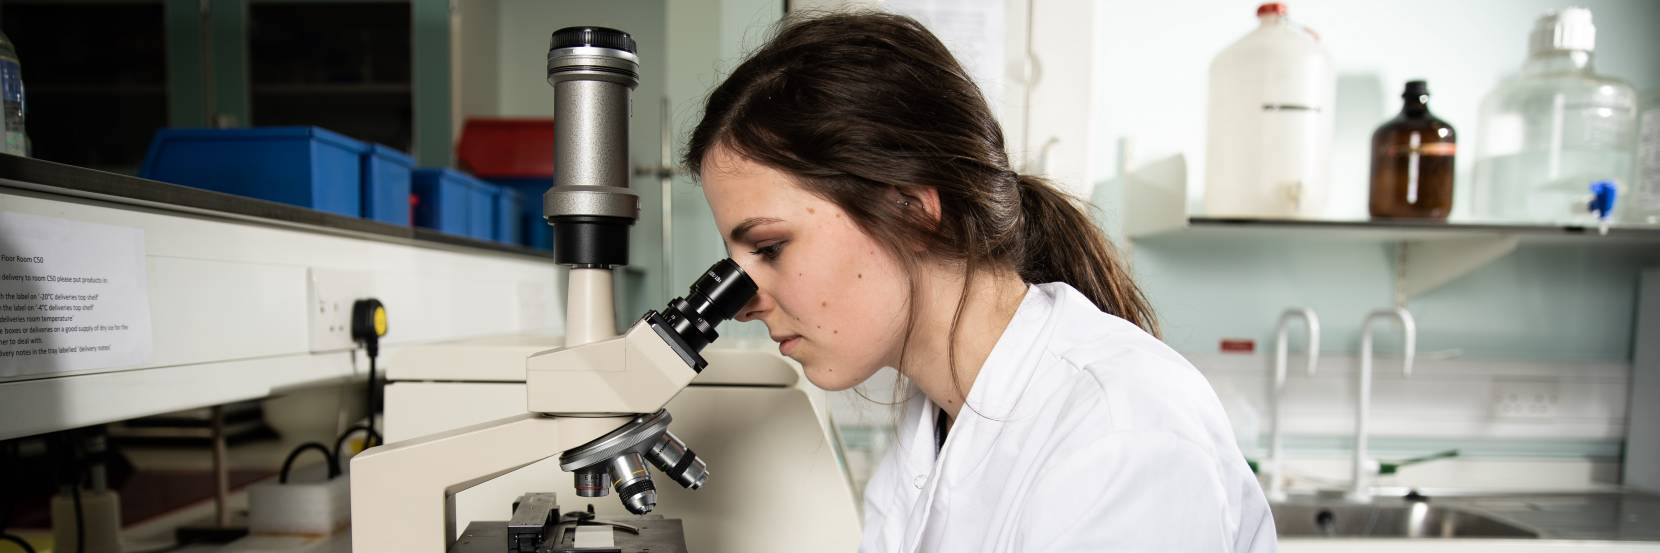 Student looks into microscope in lab